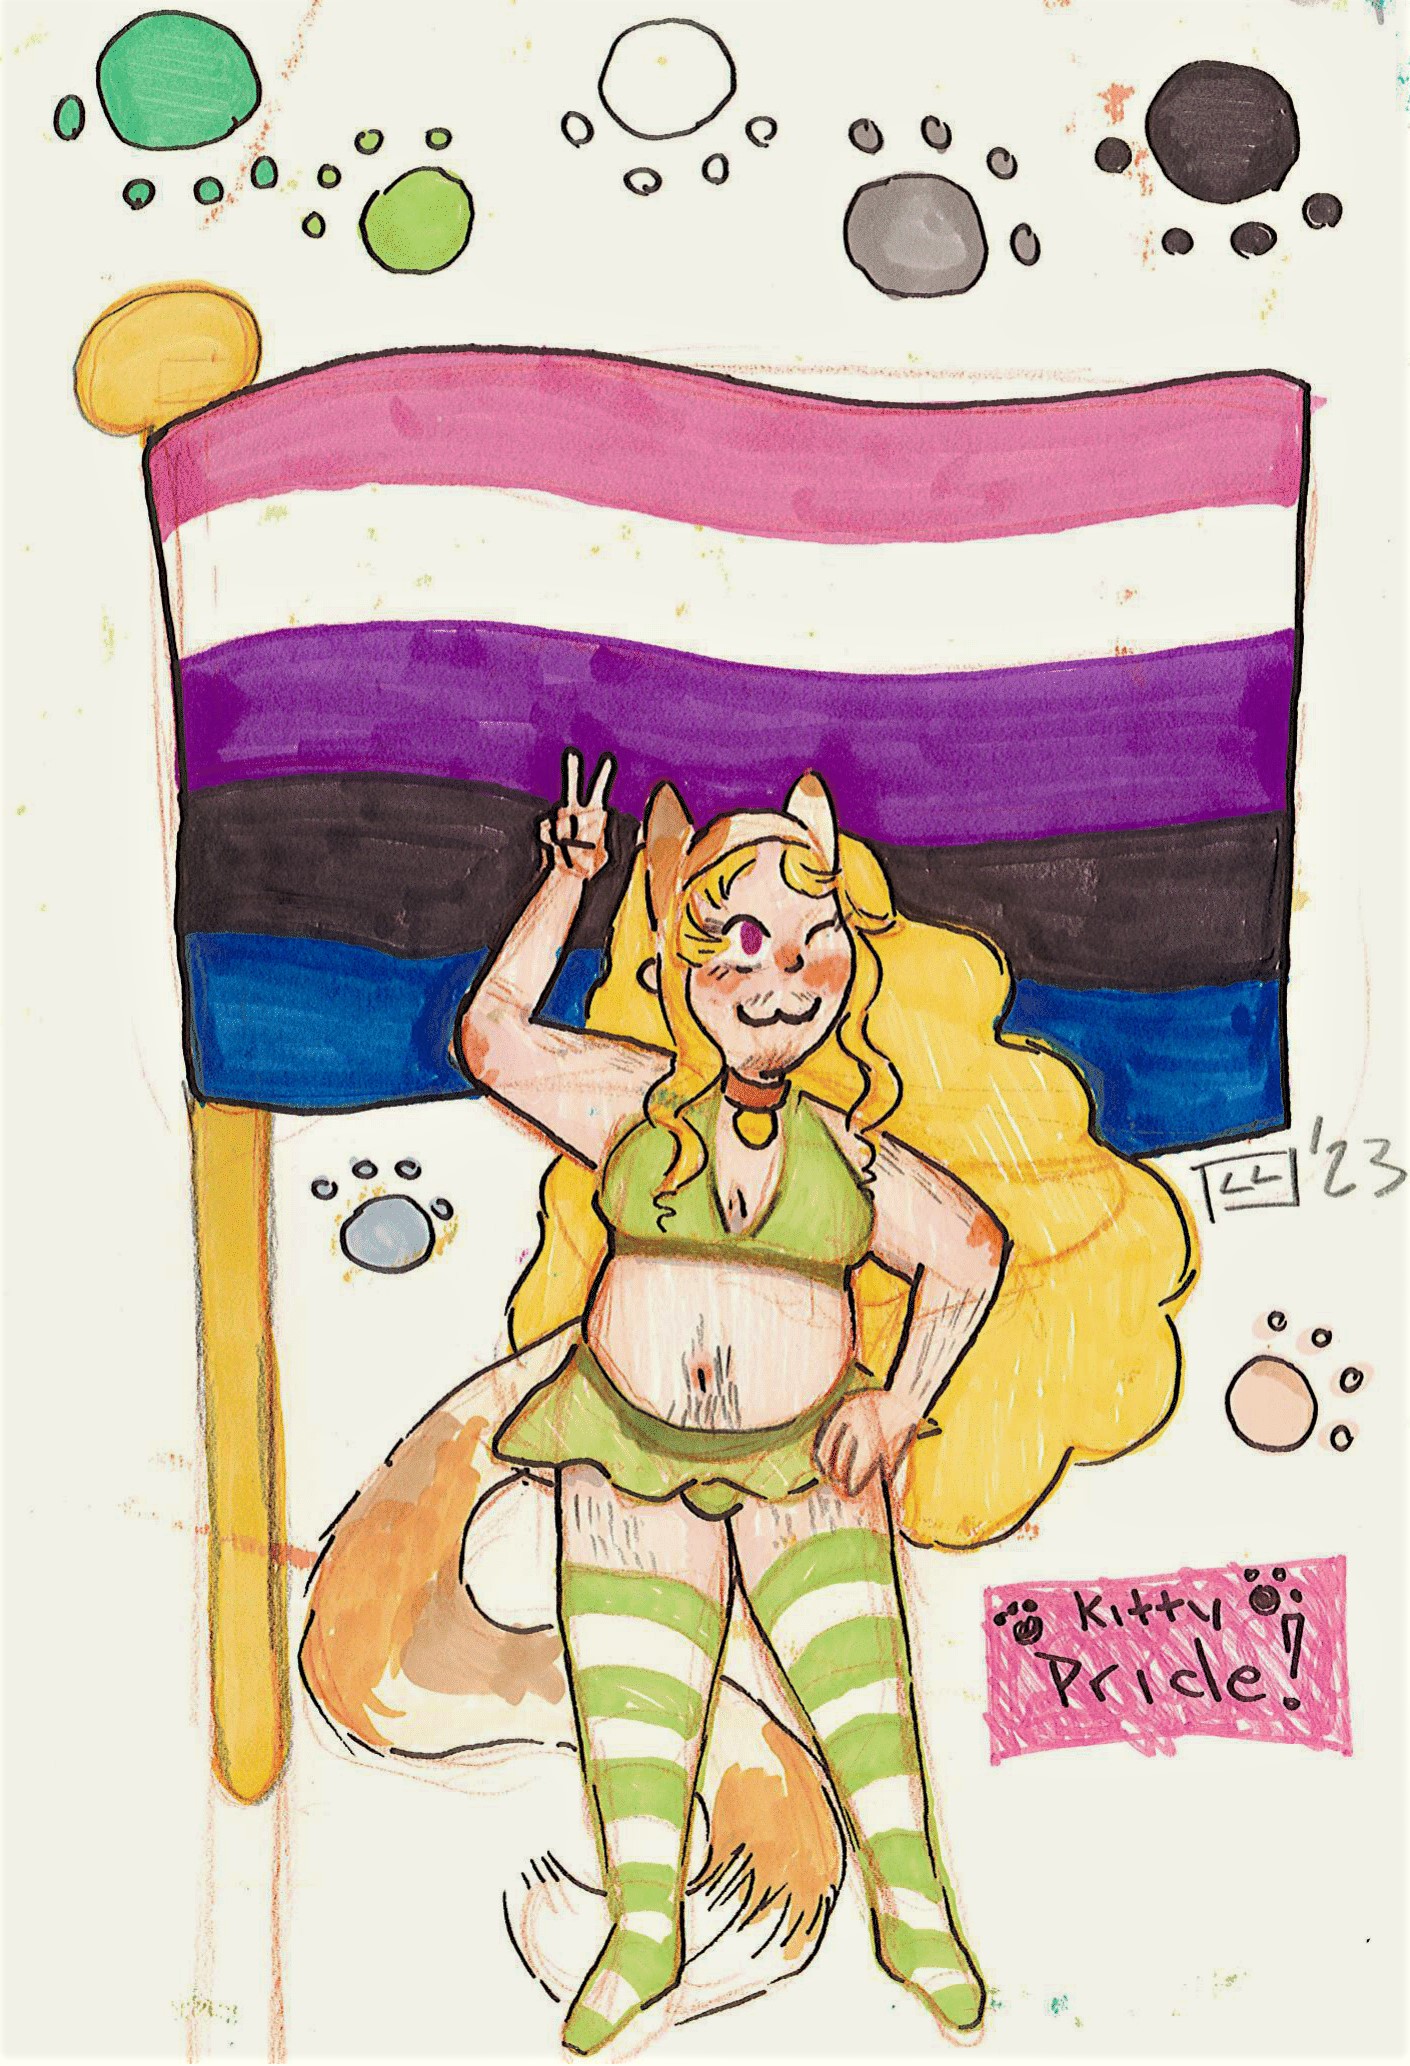 me! with a genderfluid and aromantic flag behind me